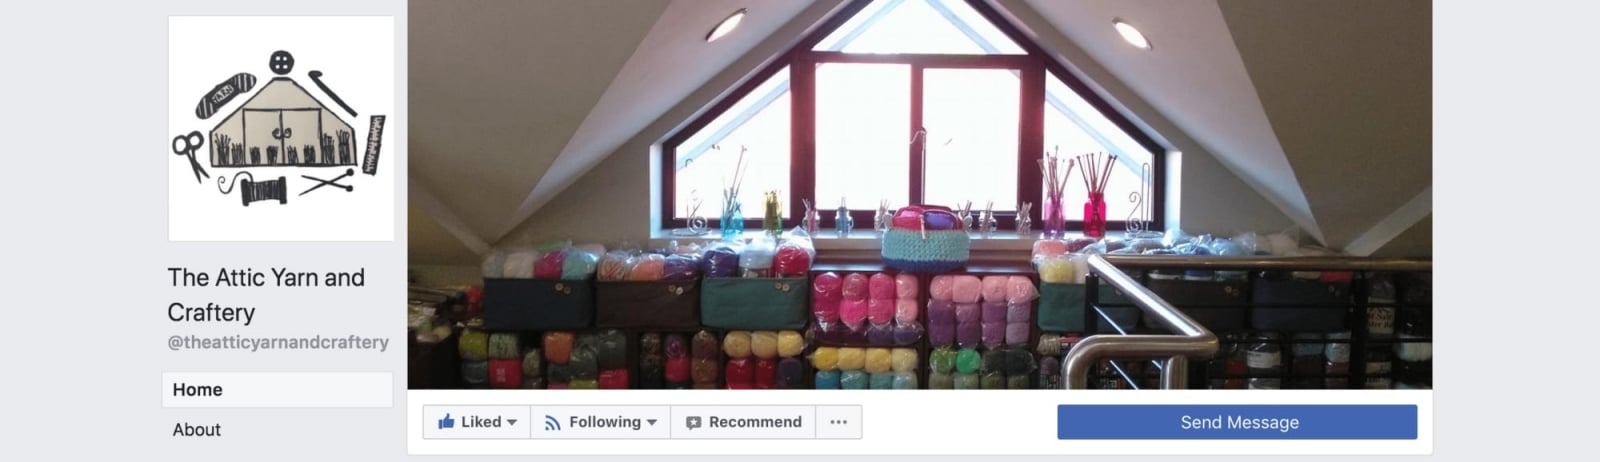 The Attic Yarn and Craftery